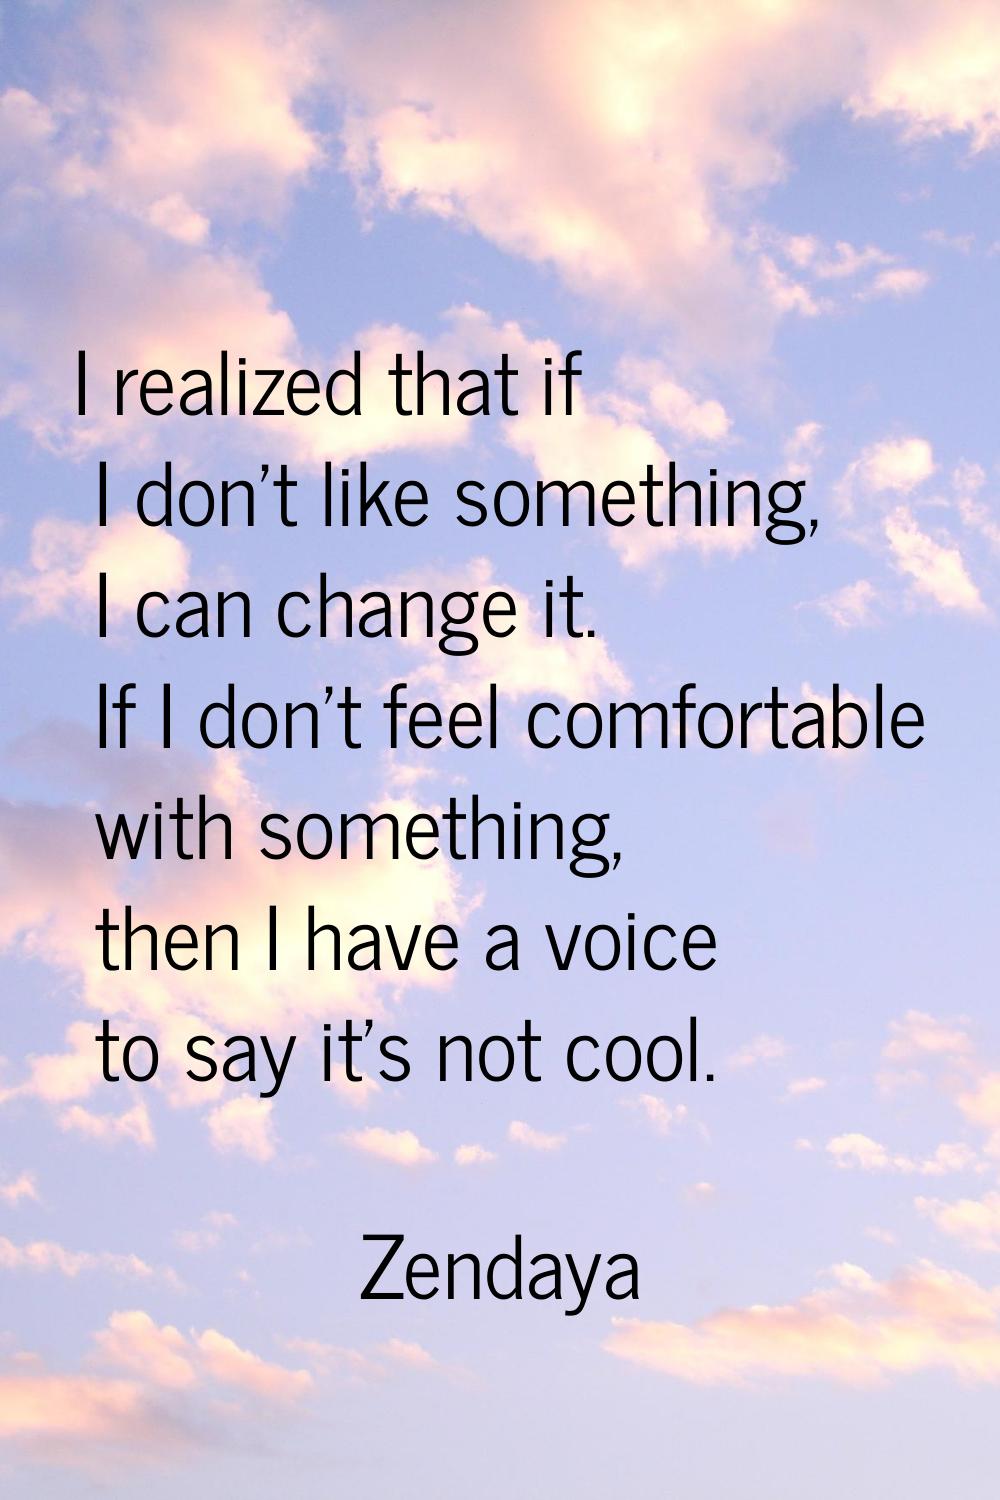 I realized that if I don't like something, I can change it. If I don't feel comfortable with someth